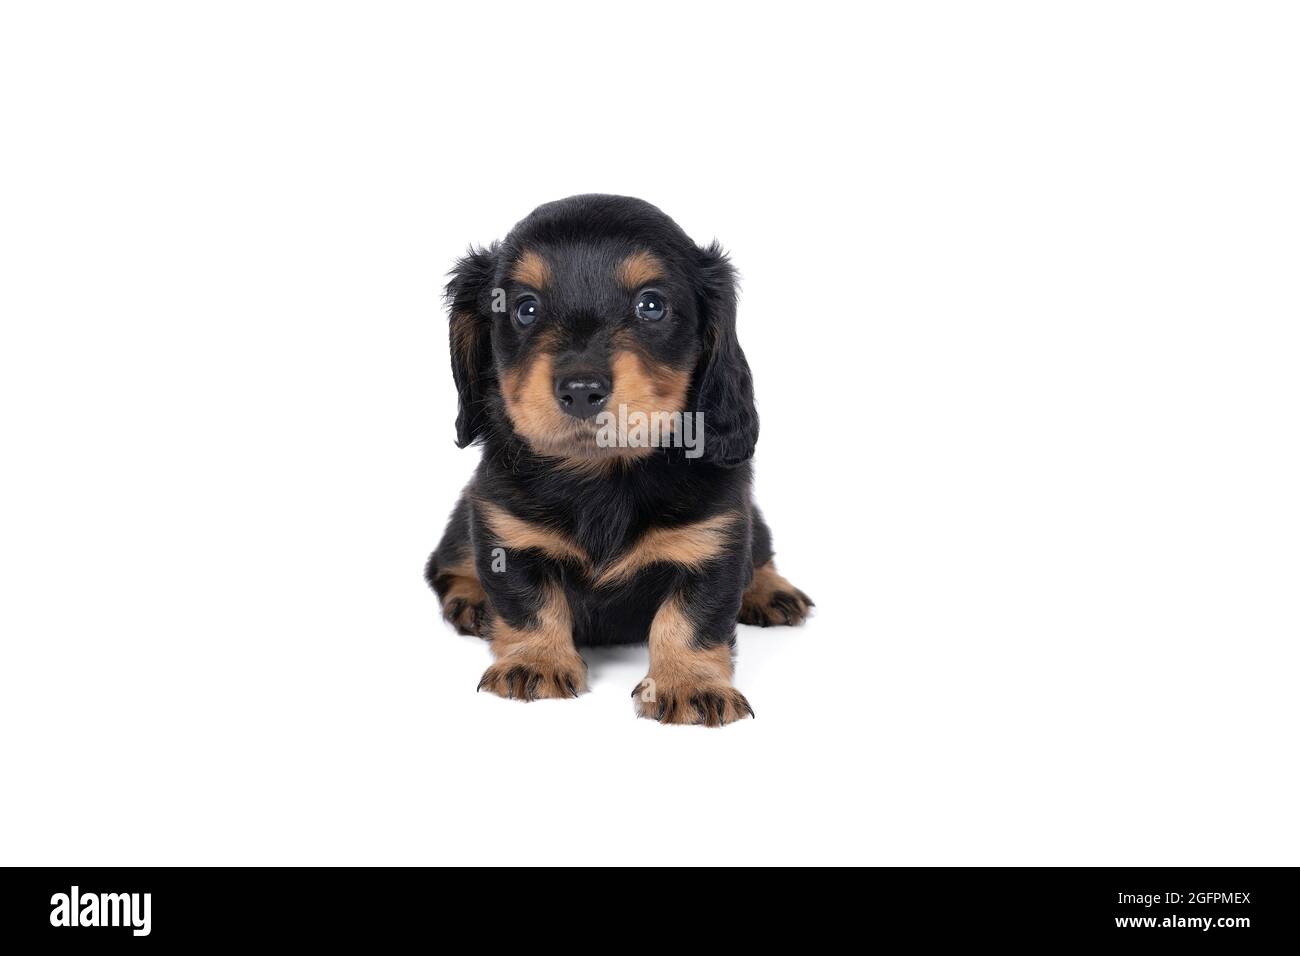 Closeup of a bi-colored longhaired  wire-haired Dachshund  dog isolated on a white background Stock Photo